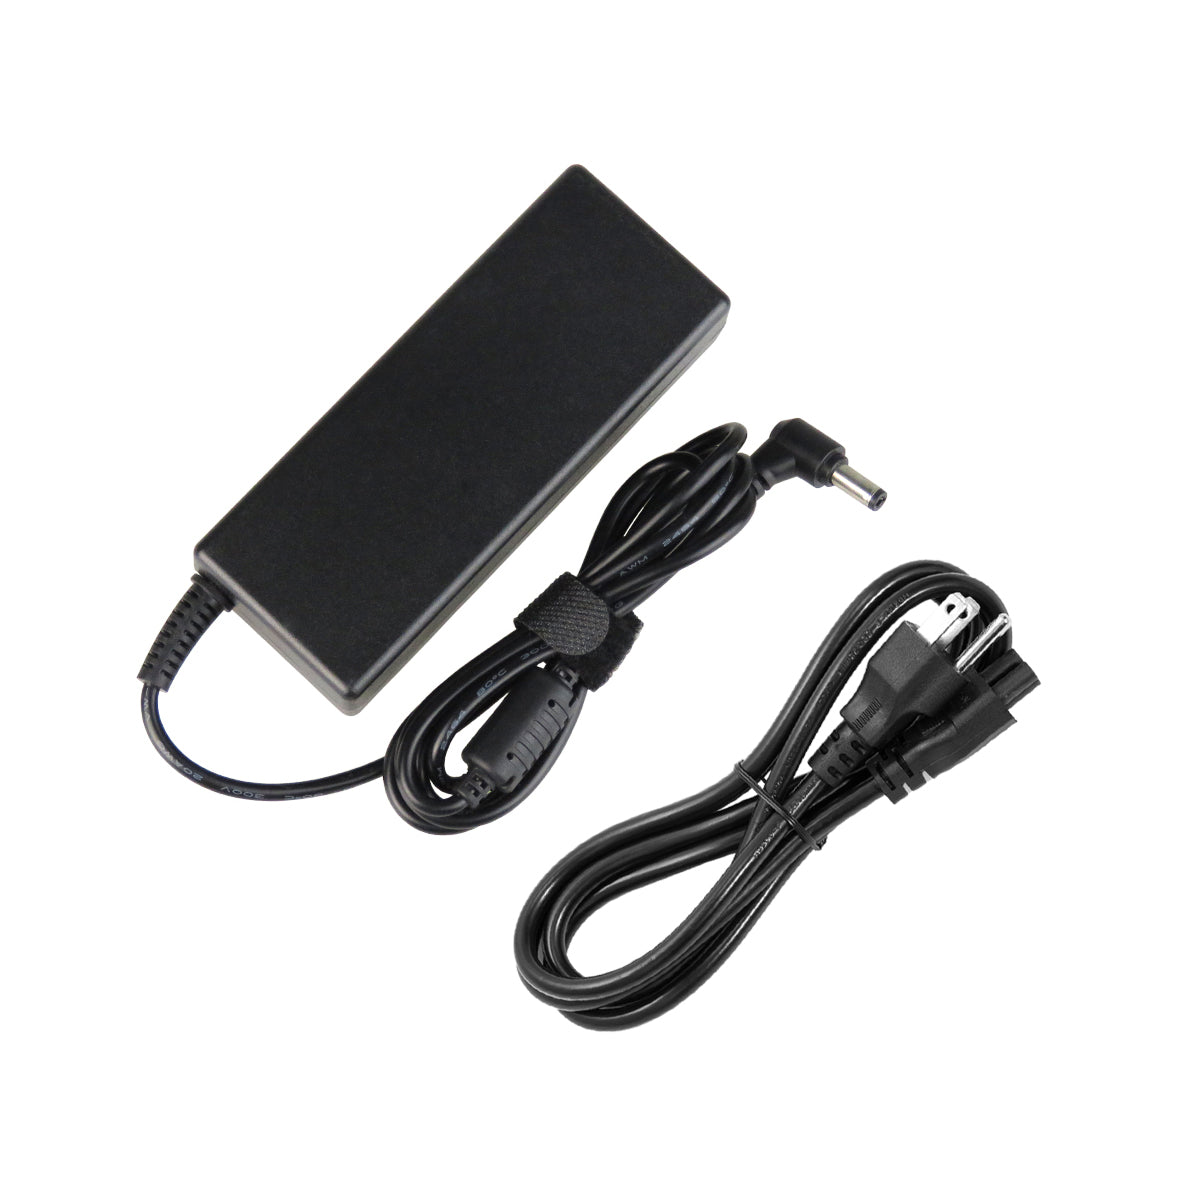 AC Adapter Charger for ASUS X58L Notebook.